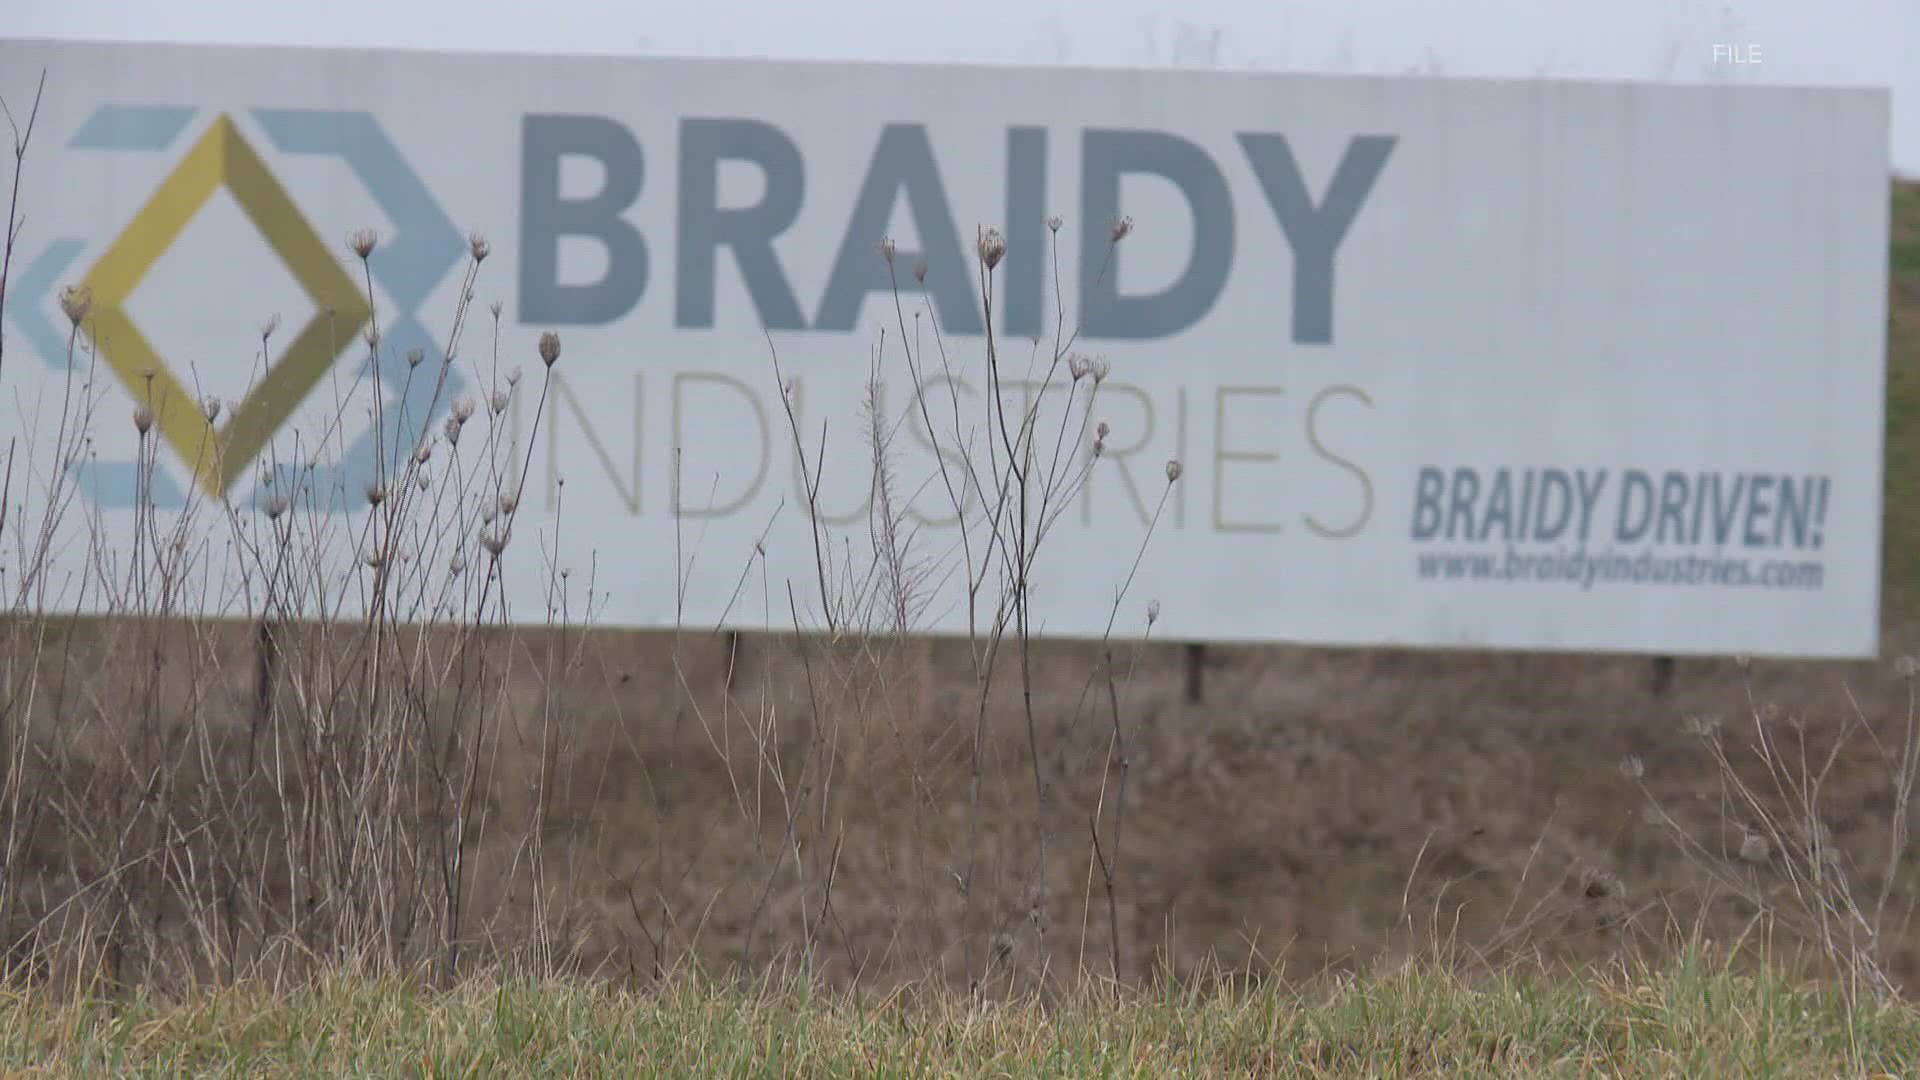 Gov. Andy Beshear announced the recovery of $15 million from former Gov. Matt Bevin's failed Braidy Industries deal. The investment was made in 2017.